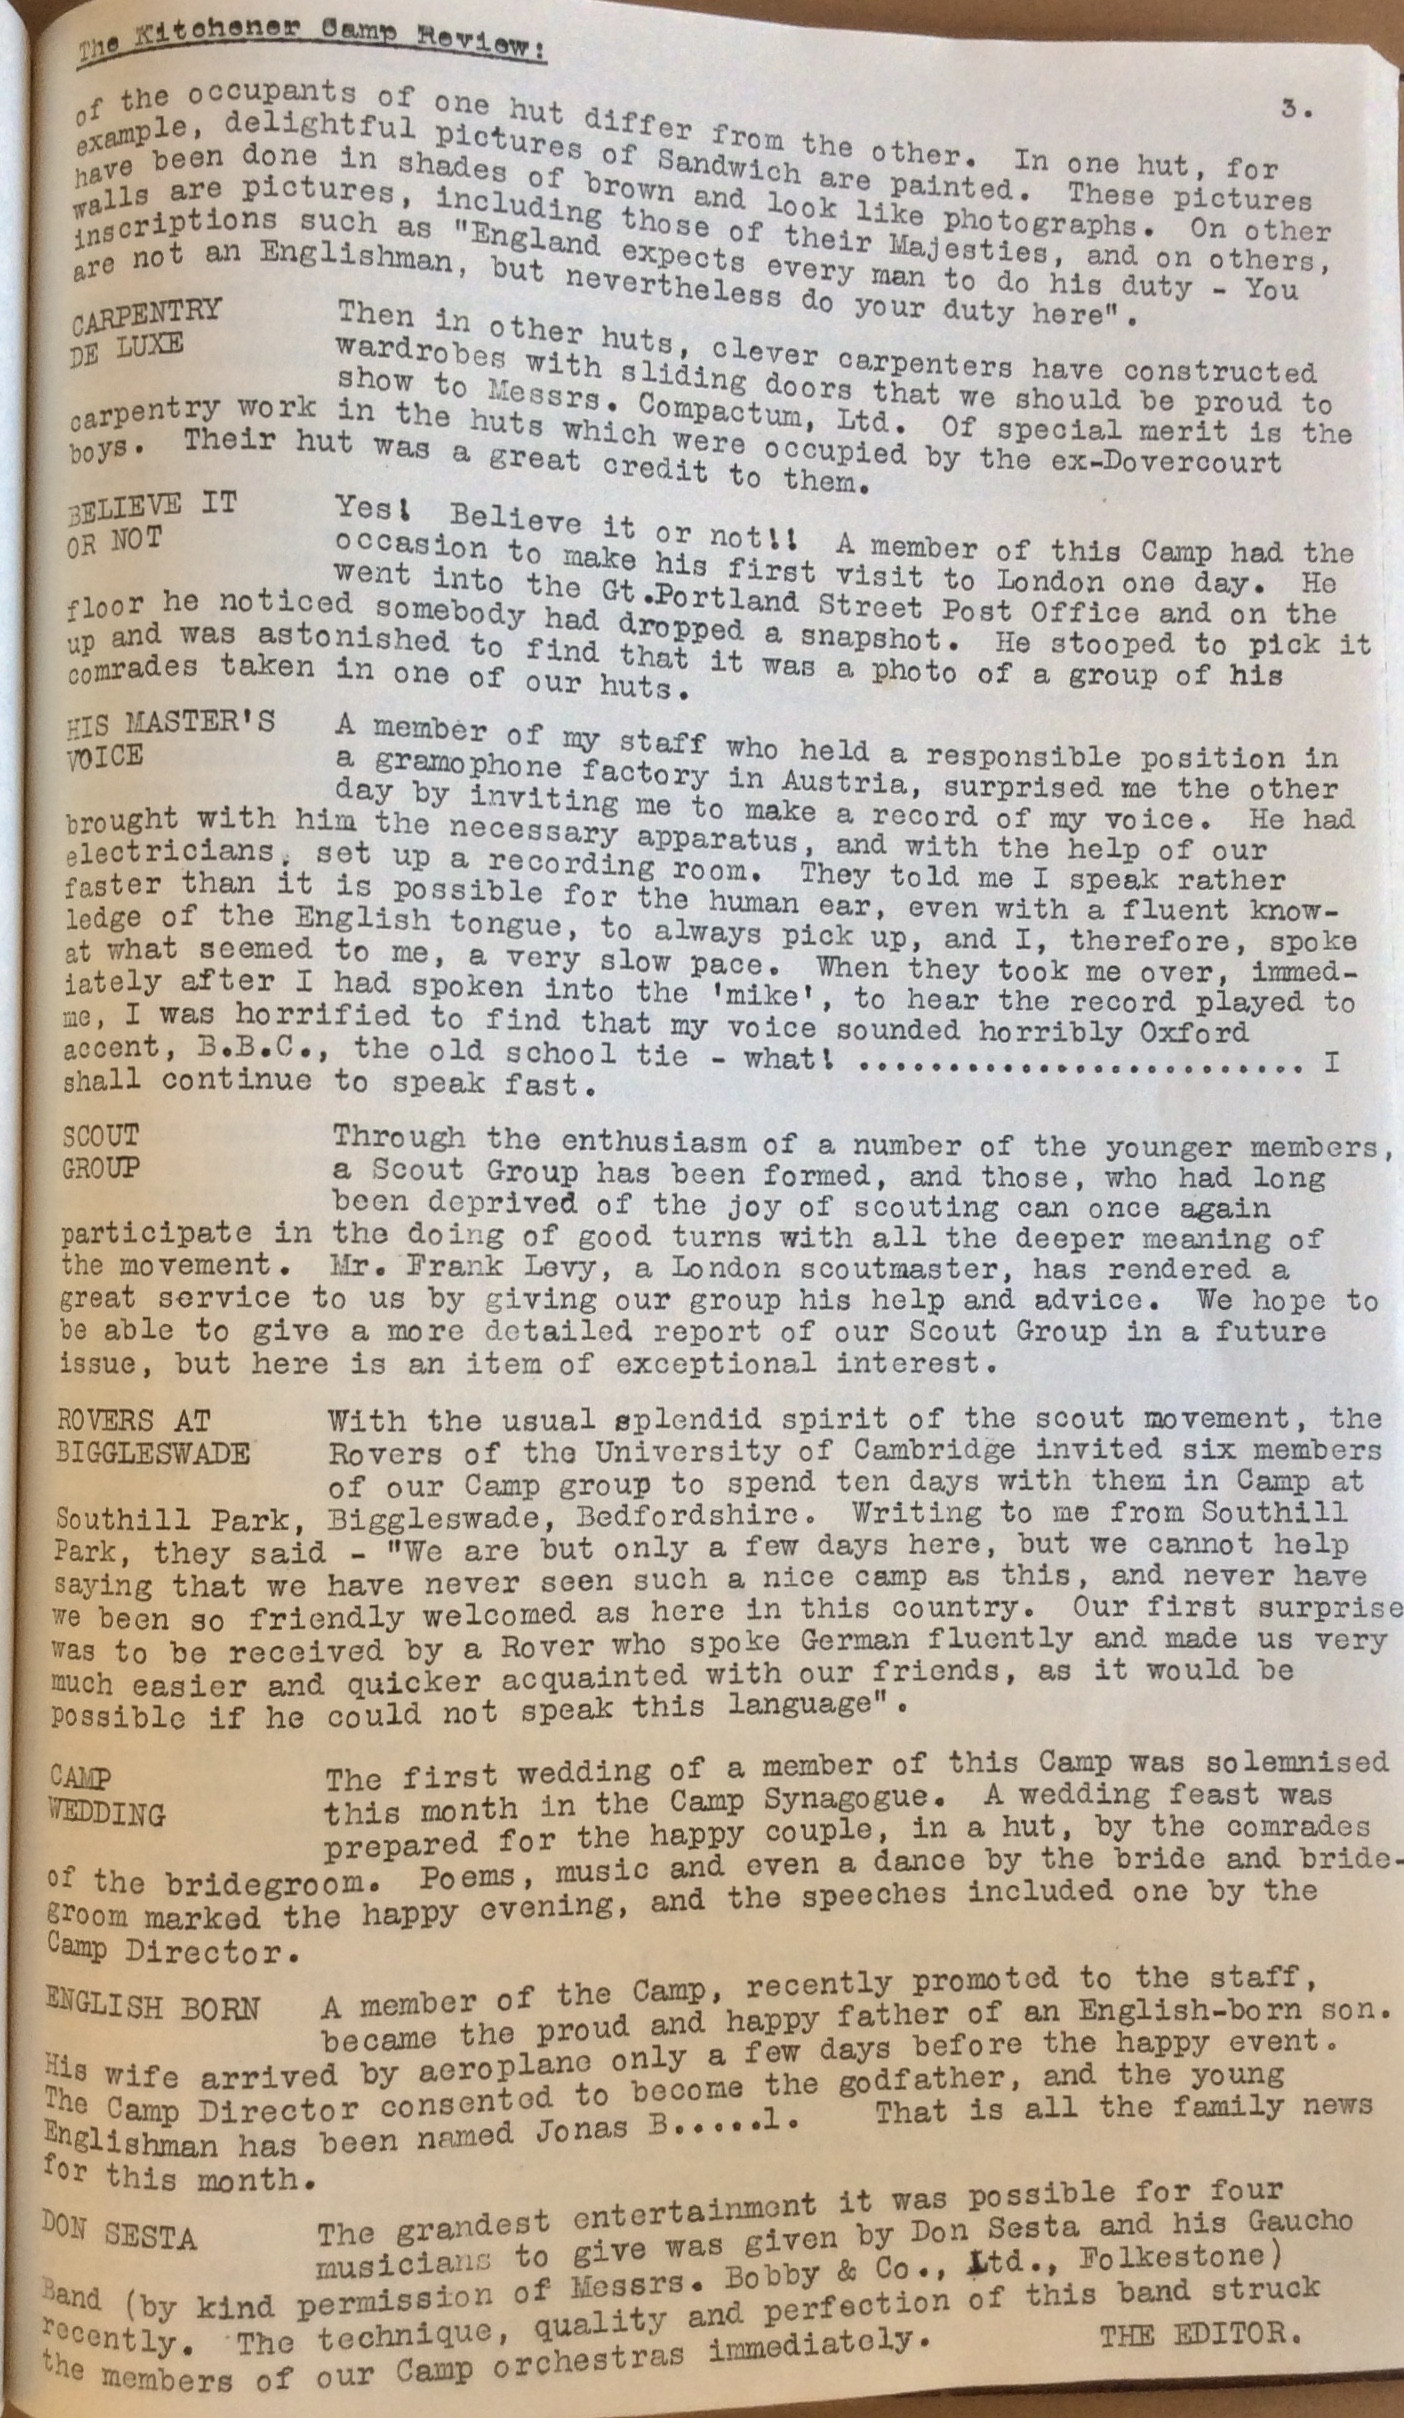 The Kitchener Camp Review, July 1939, No. 5, page 3